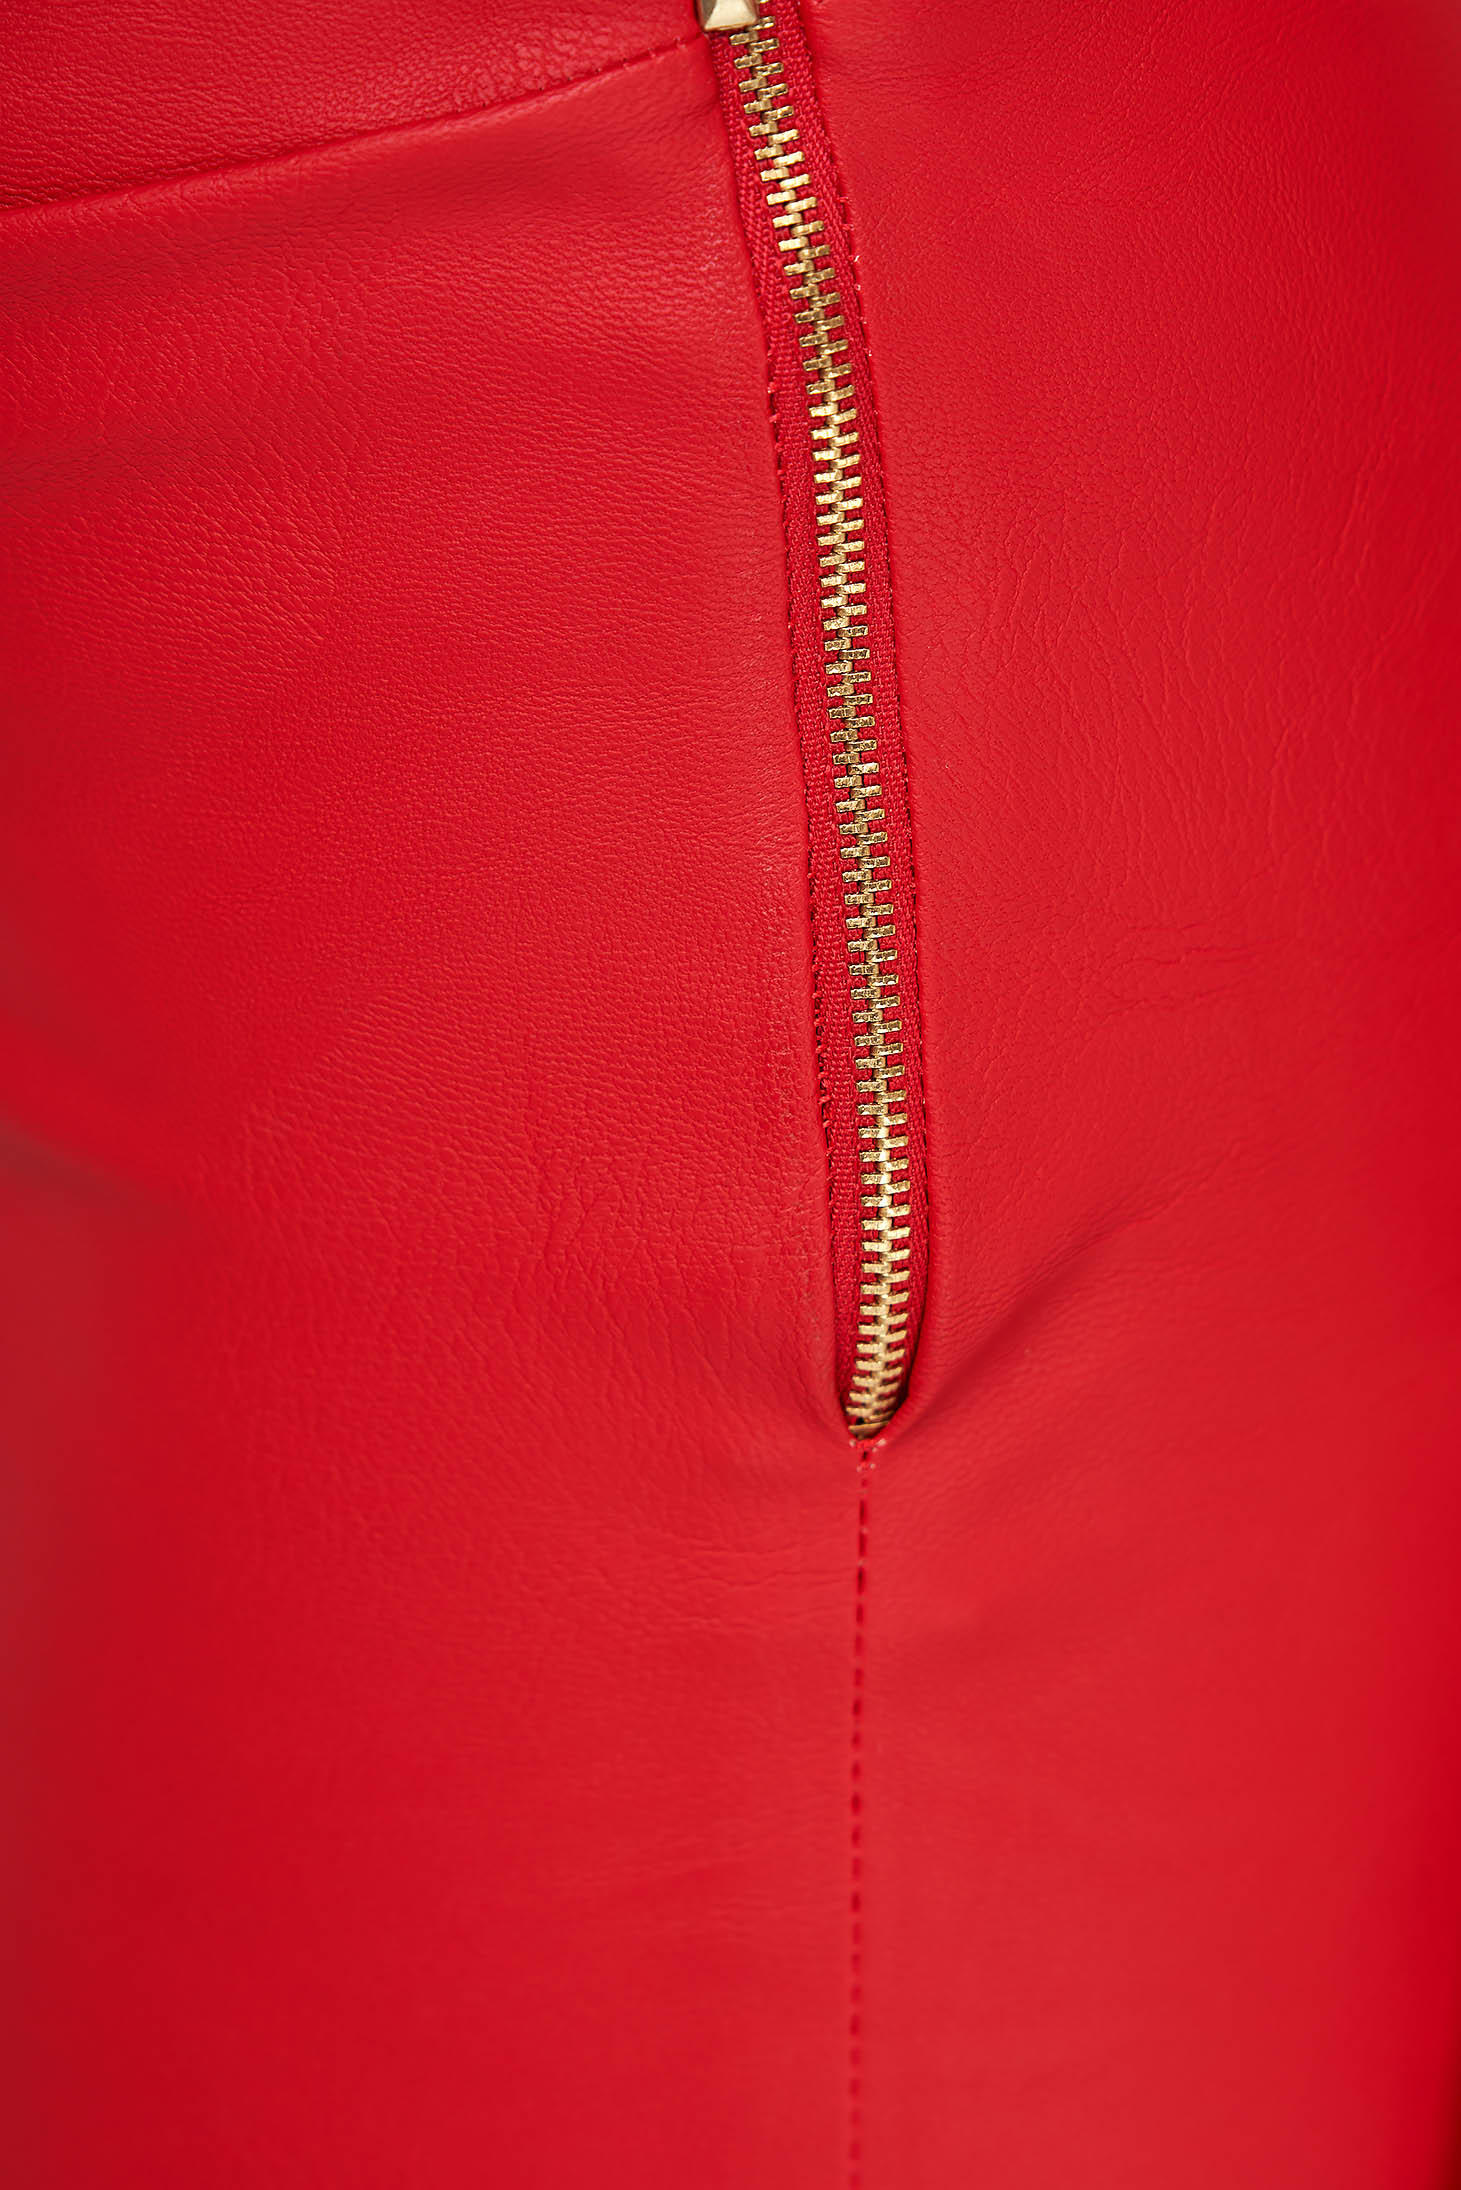 Red Faux Leather Tapered High Waist Pants - StarShinerS 6 - StarShinerS.com